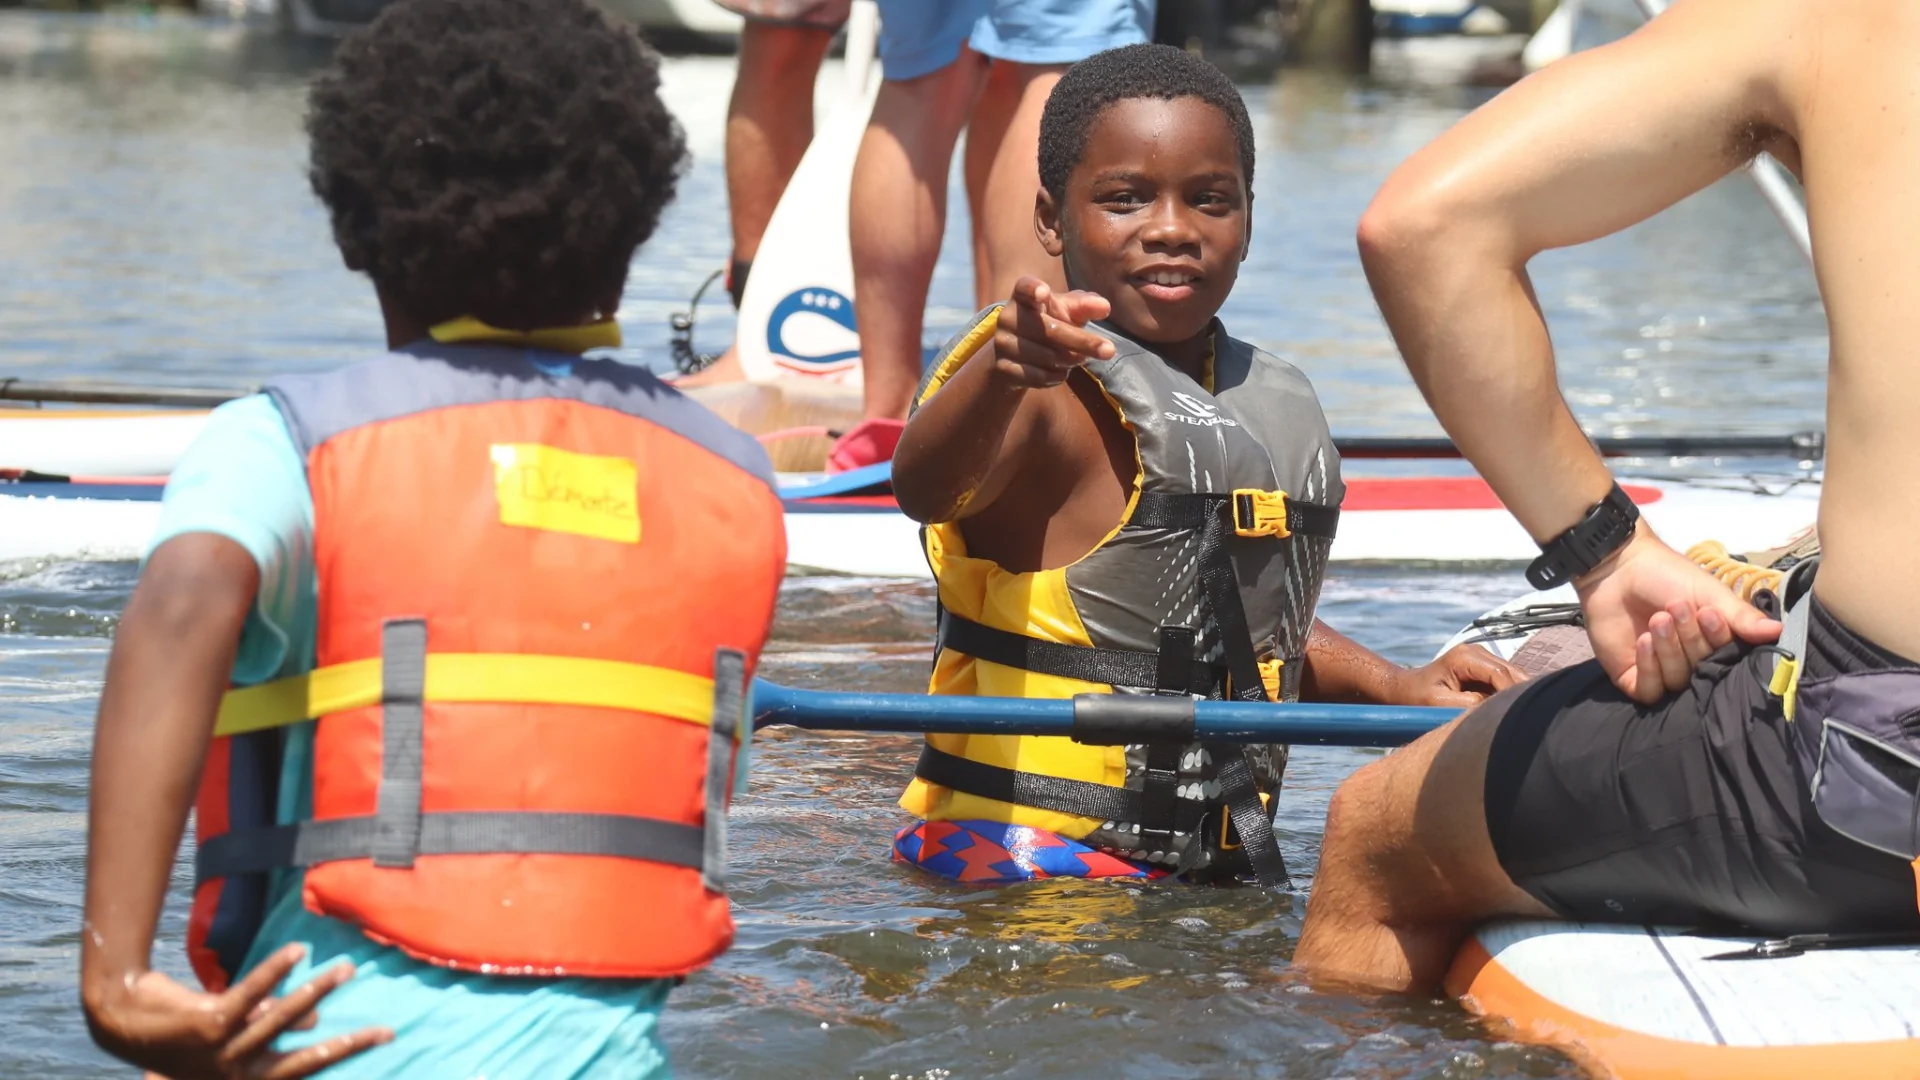 a smiling child stands in the water in a life vest and points toward the camera.